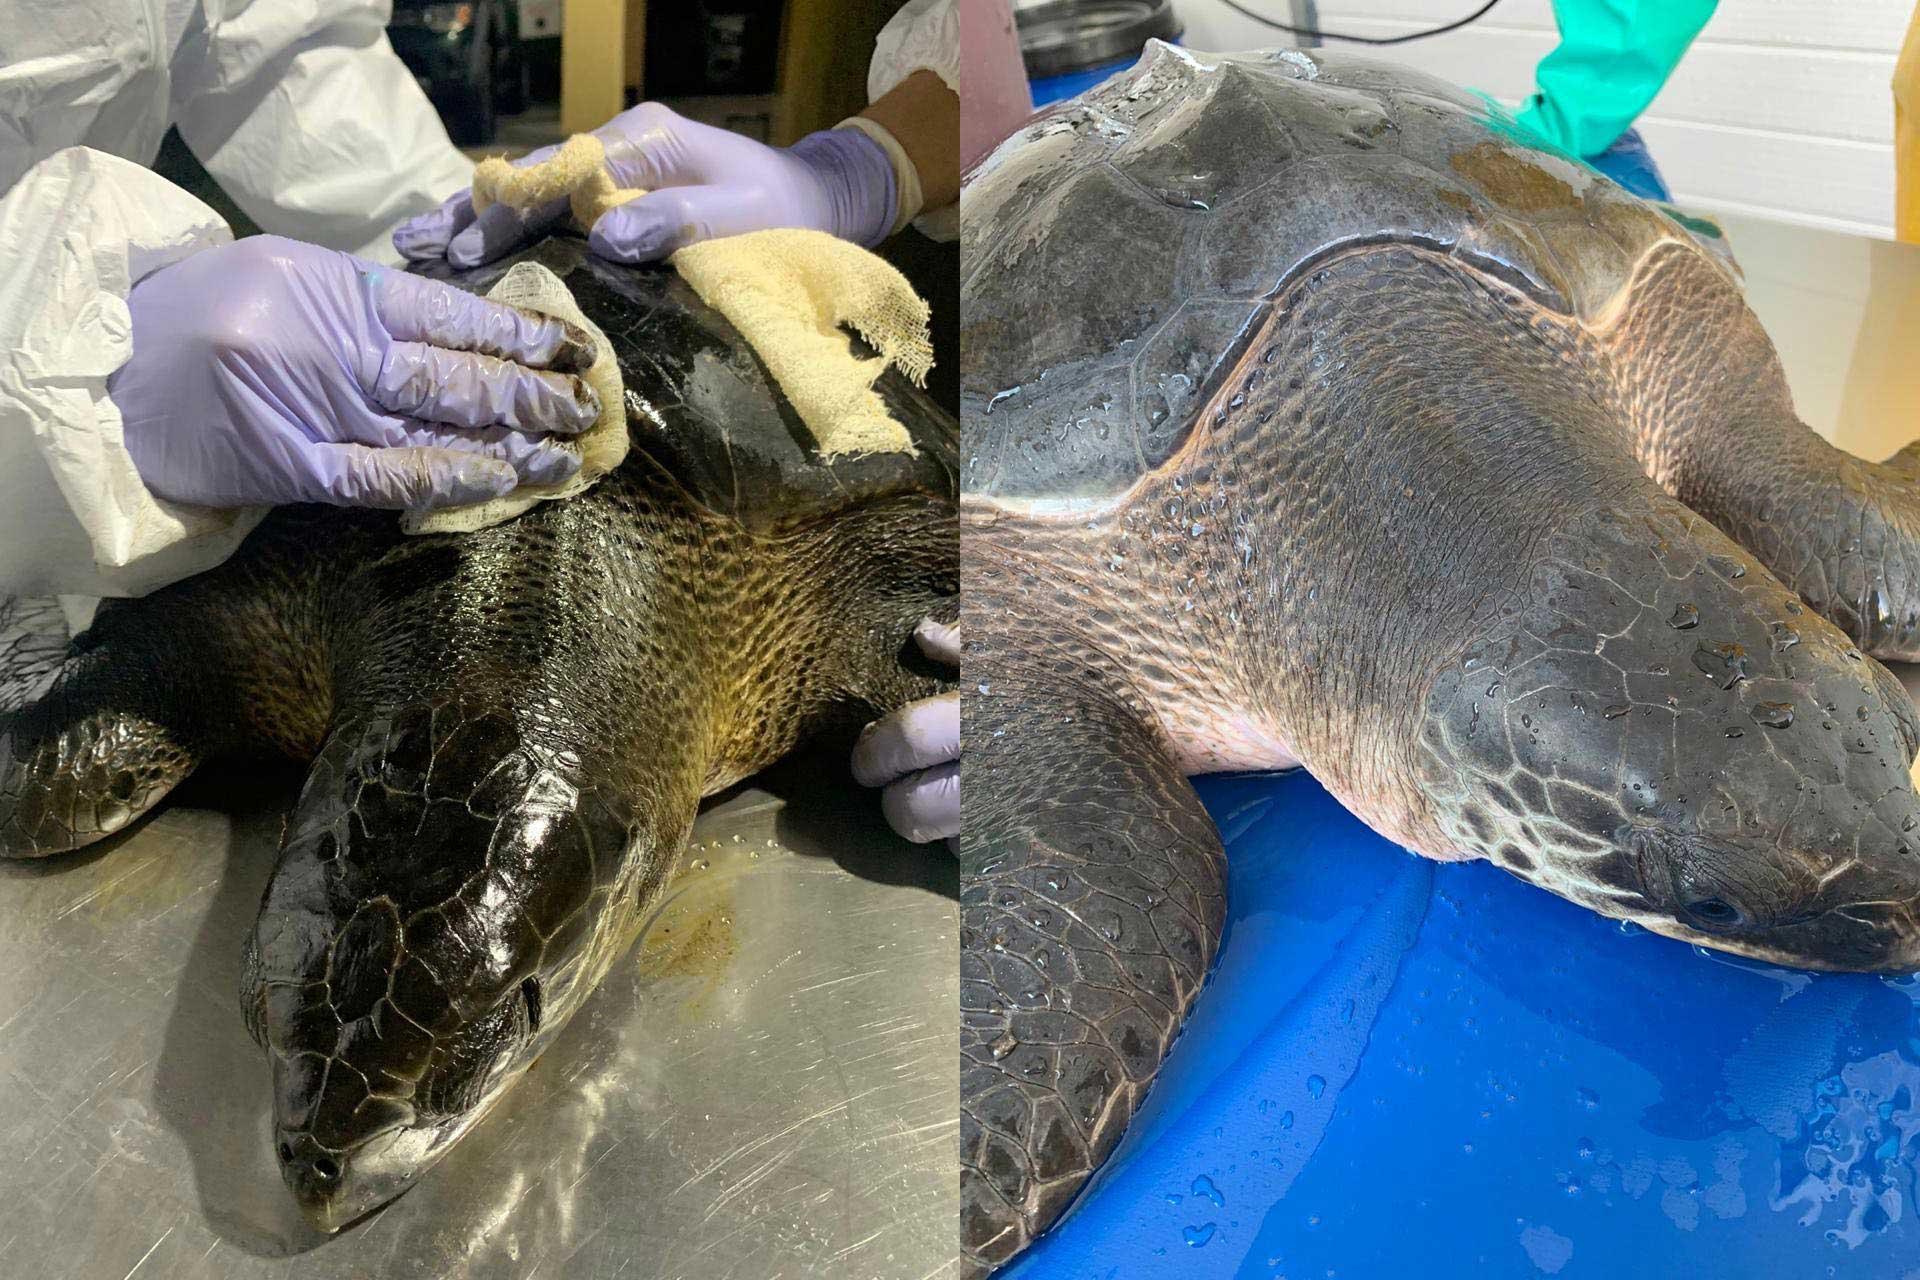 Two side-by-side images show a turtle covered in oil and after the oil has been removed.